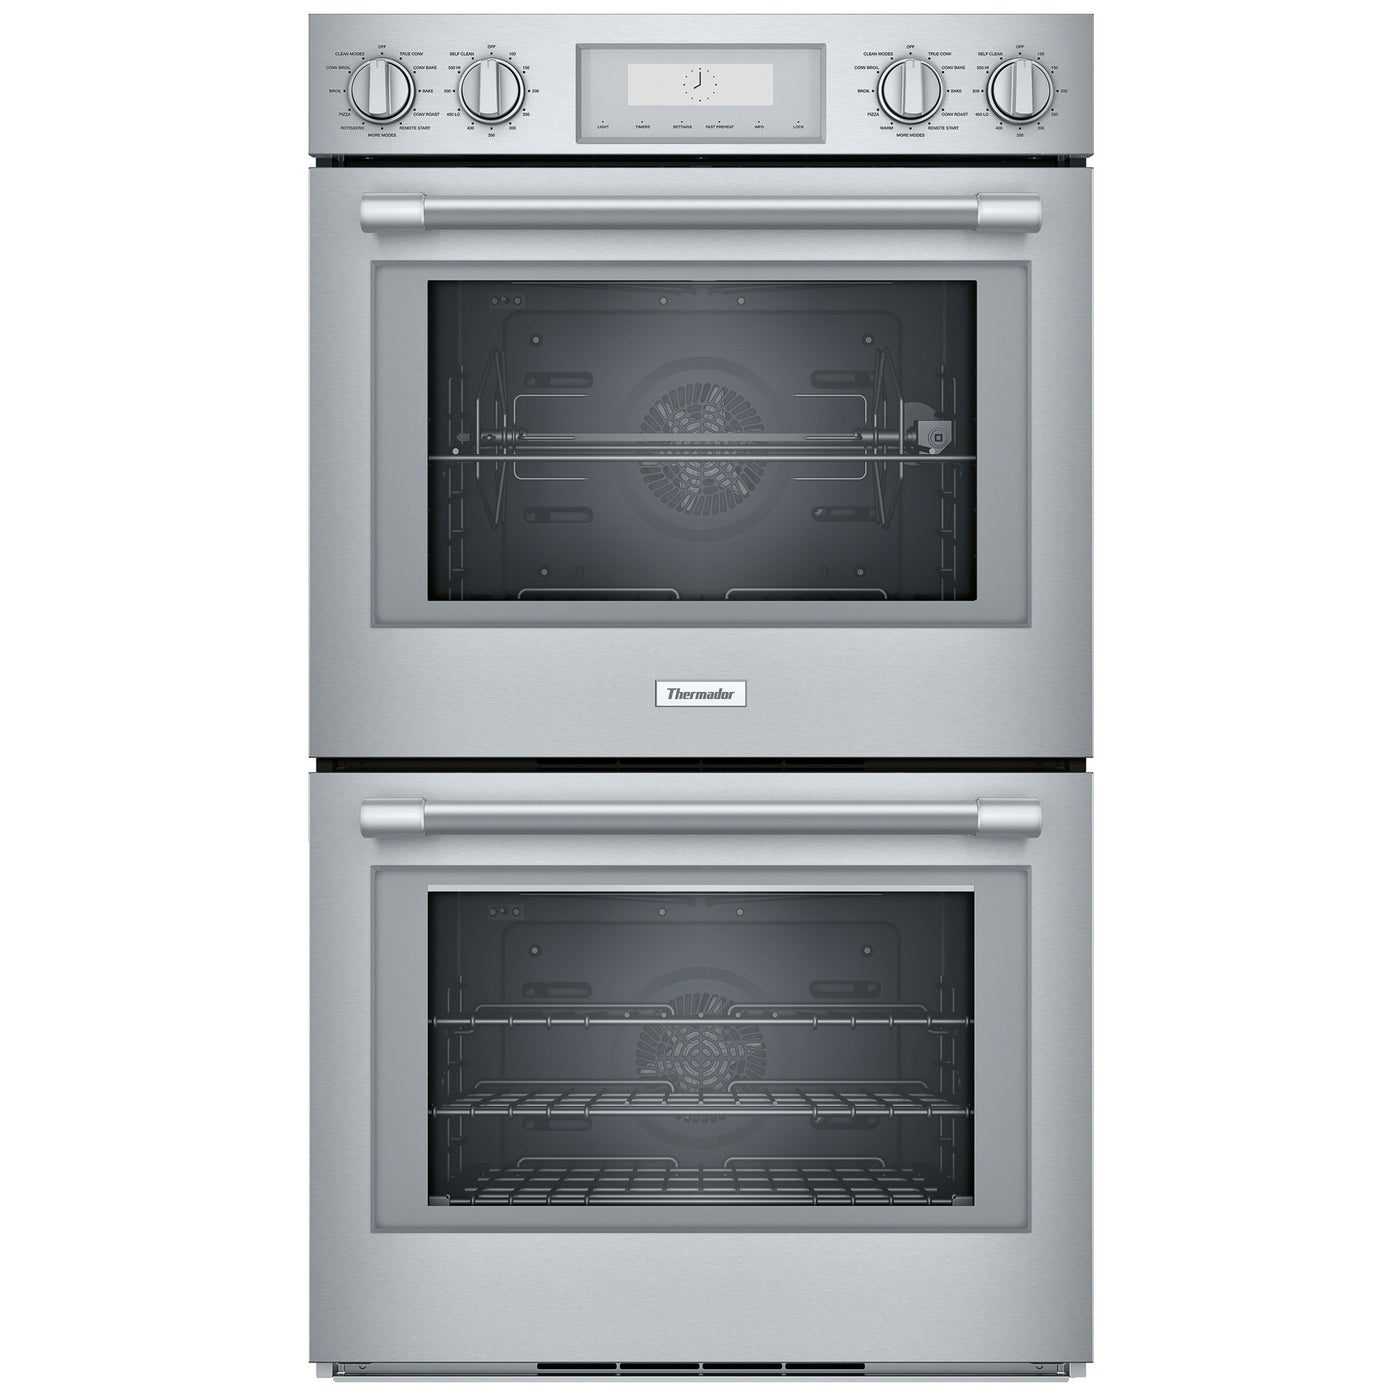 Thermador-Oven-POD302W